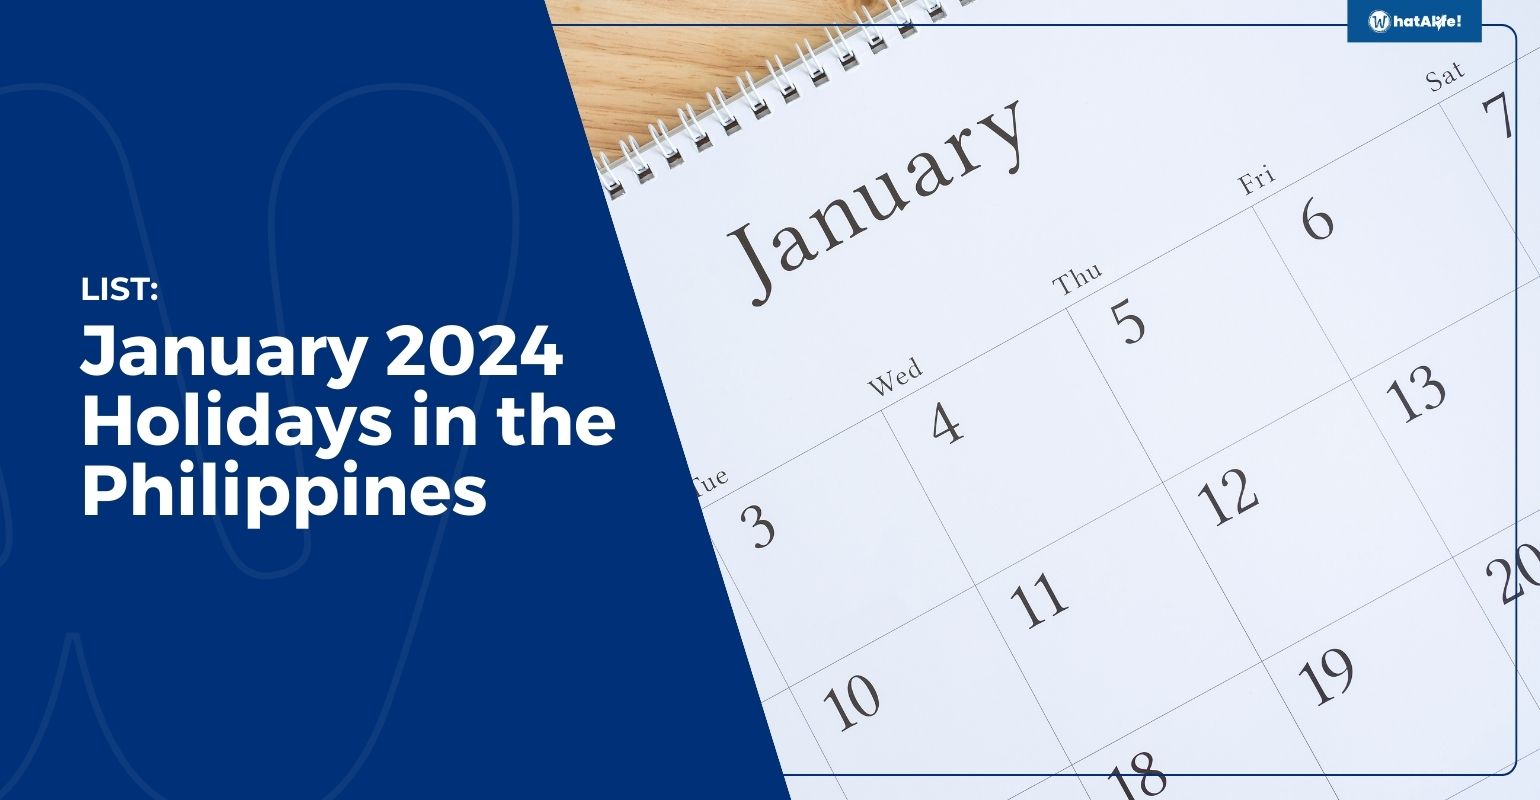 LIST: January 2024 Holidays in the Philippines